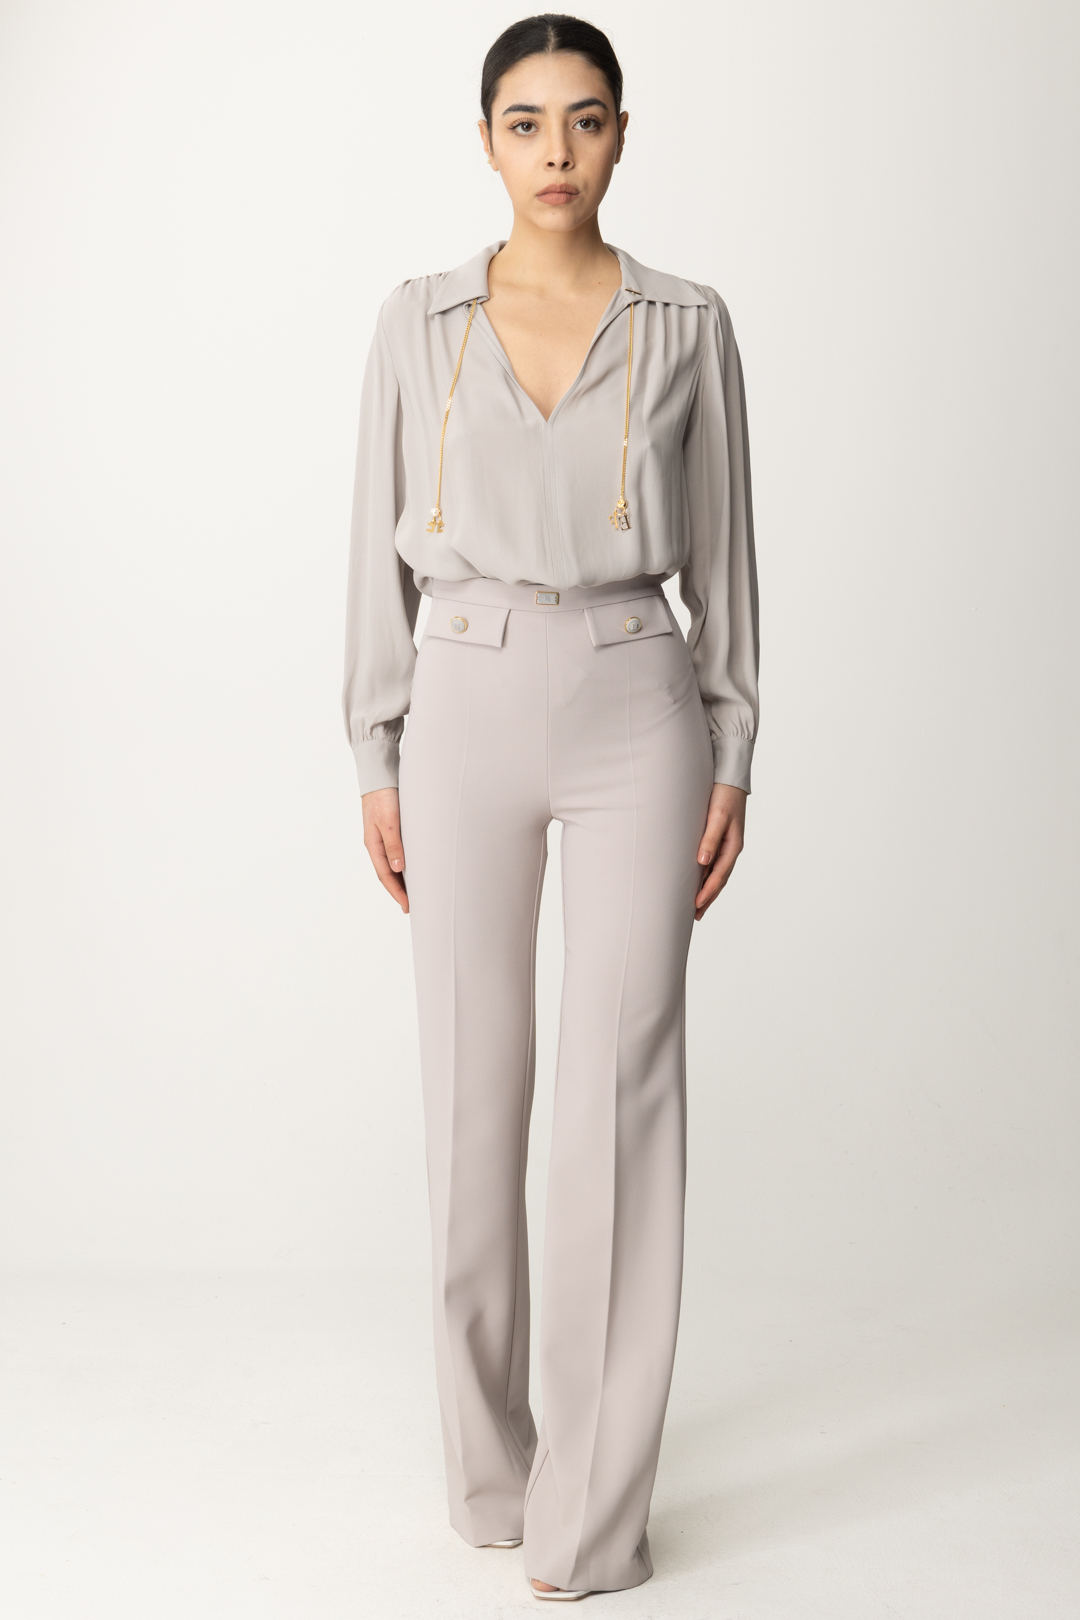 Preview: Elisabetta Franchi Wide shirt with collar accessory Perla